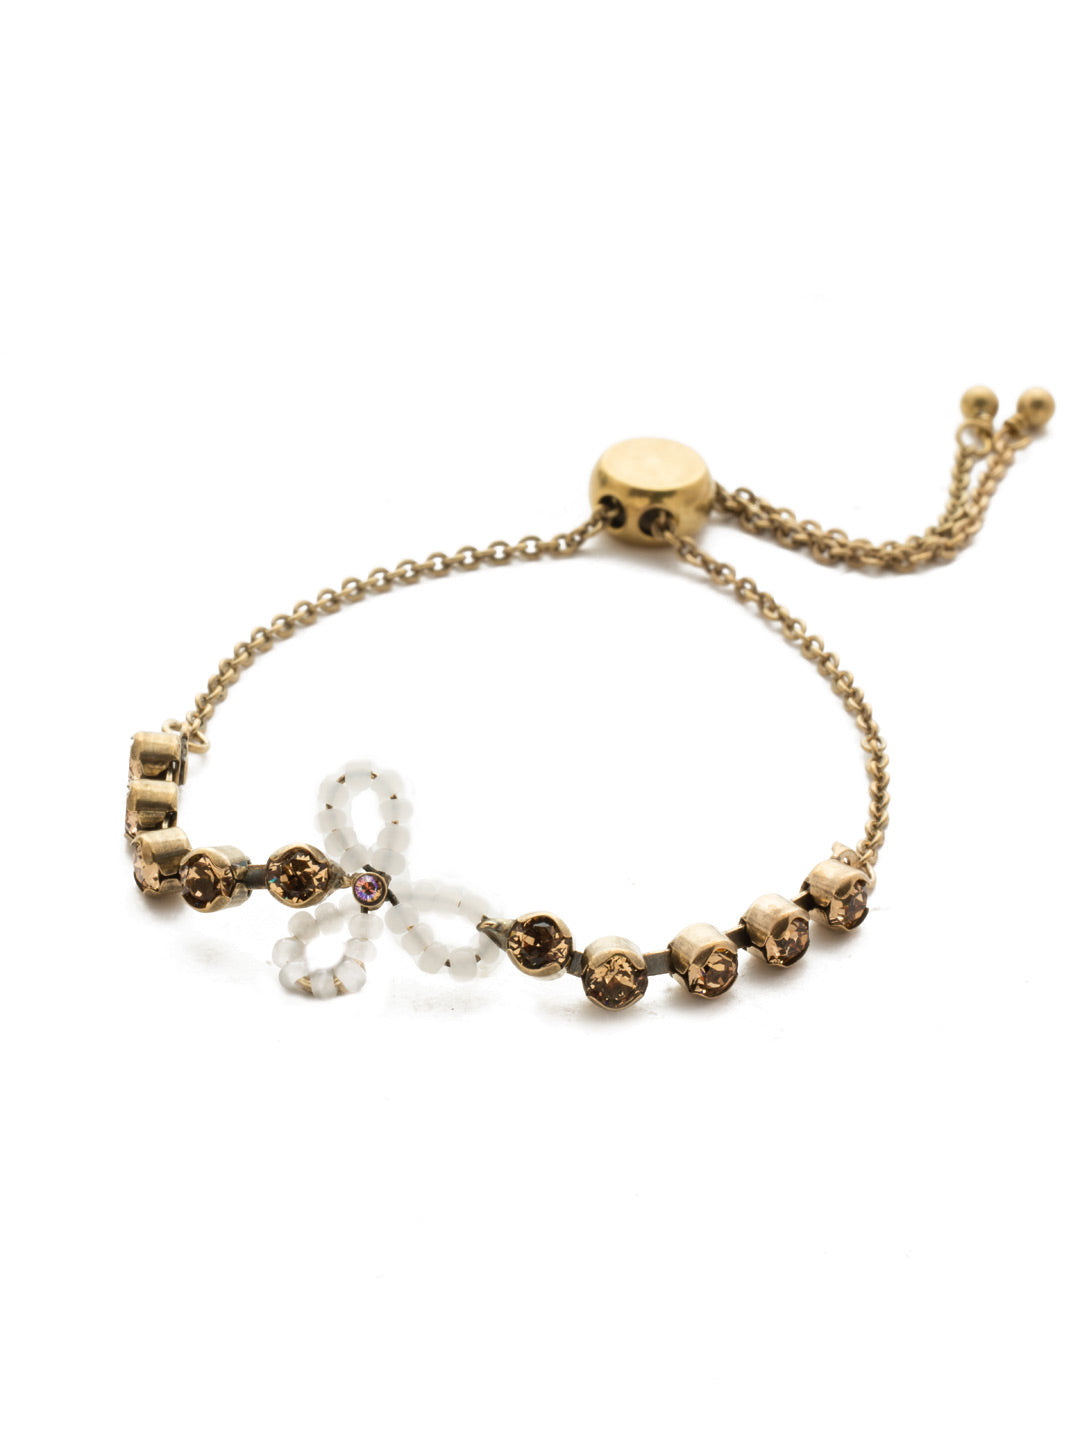 Morning Mist Slider Bracelet - BEK41AGROB - <p>Slip on something flirty, floral and sparkling with this adjustable bracelet featuring statement beading. Slider bracelet closure. From Sorrelli's Rocky Beach collection in our Antique Gold-tone finish.</p>